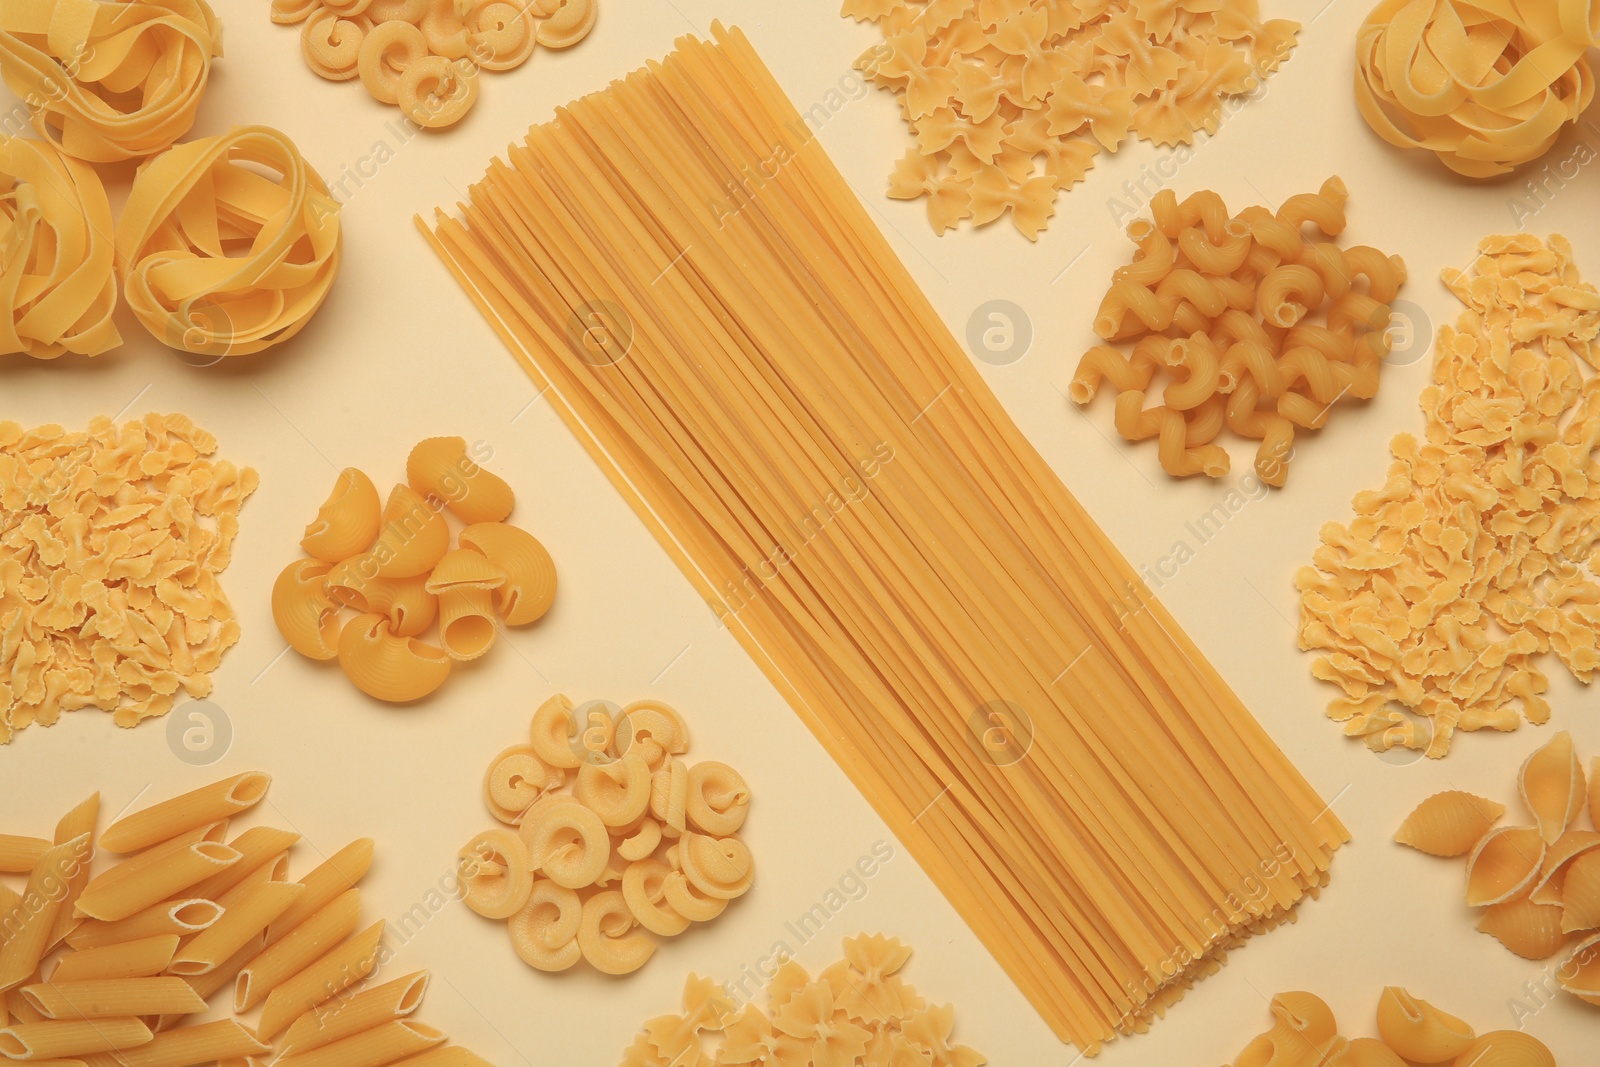 Photo of Different types of pasta on beige background, flat lay